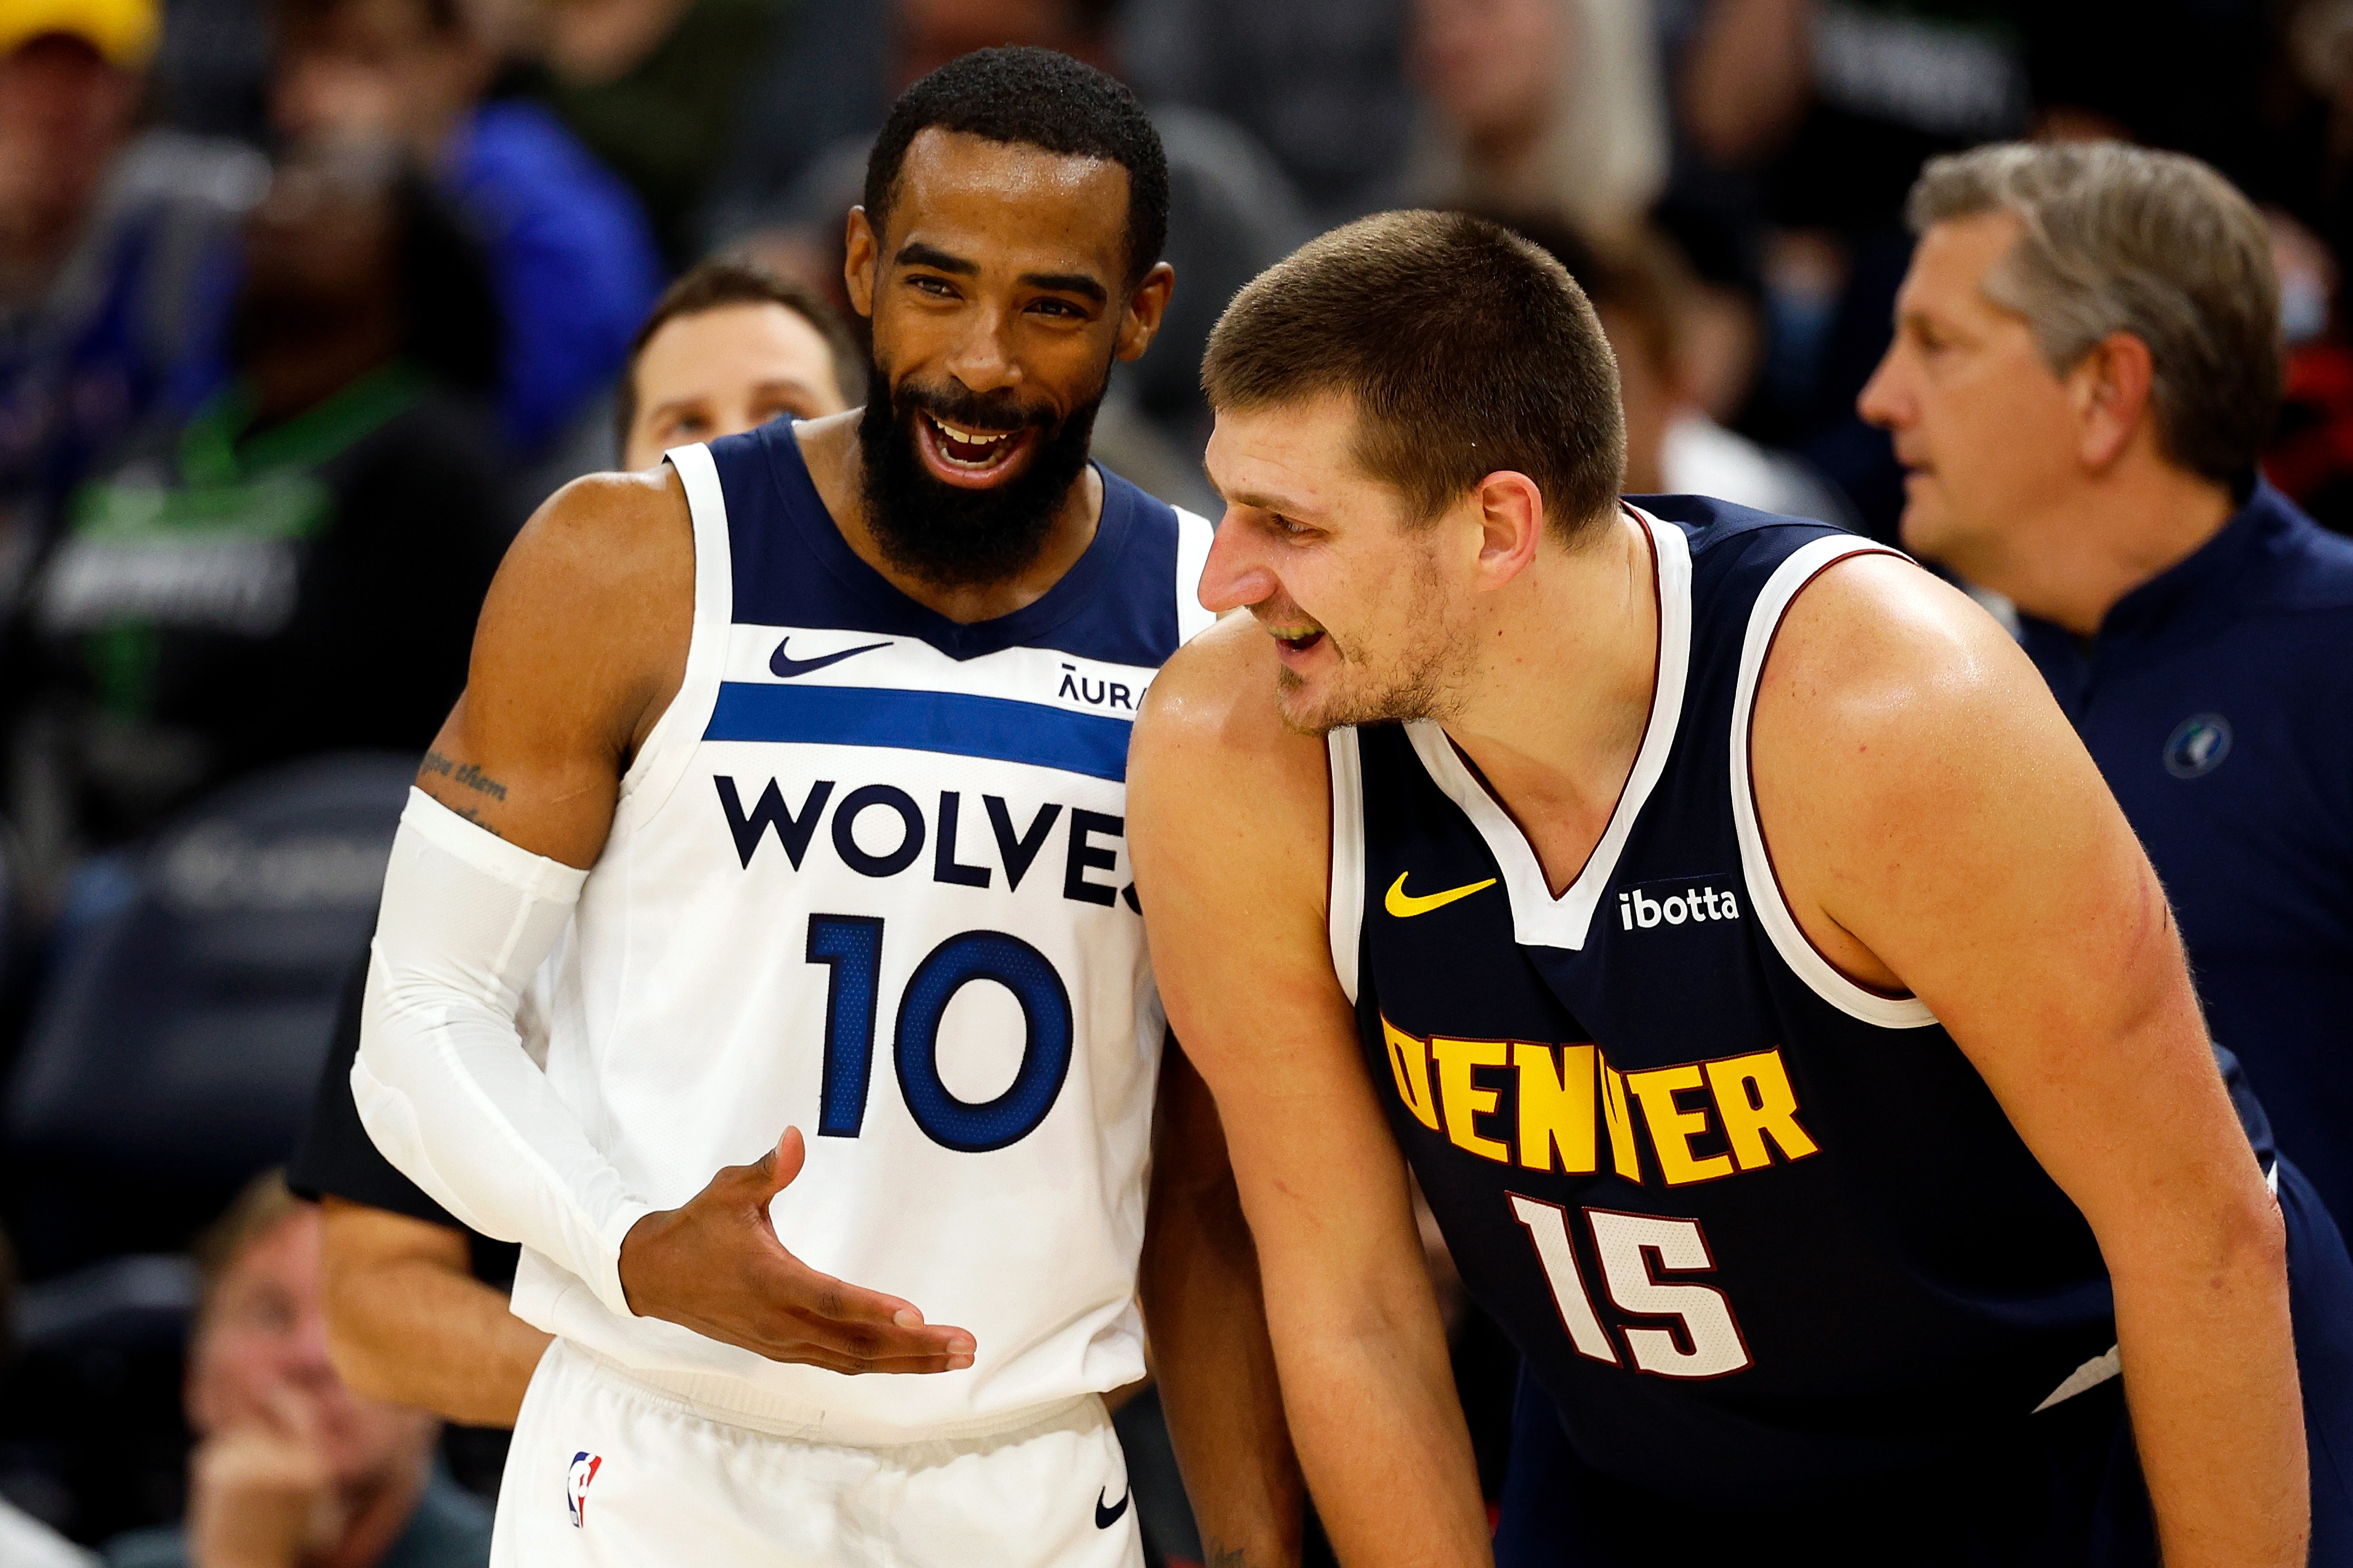 Timberwolves-Nuggets playoff tip-off times set